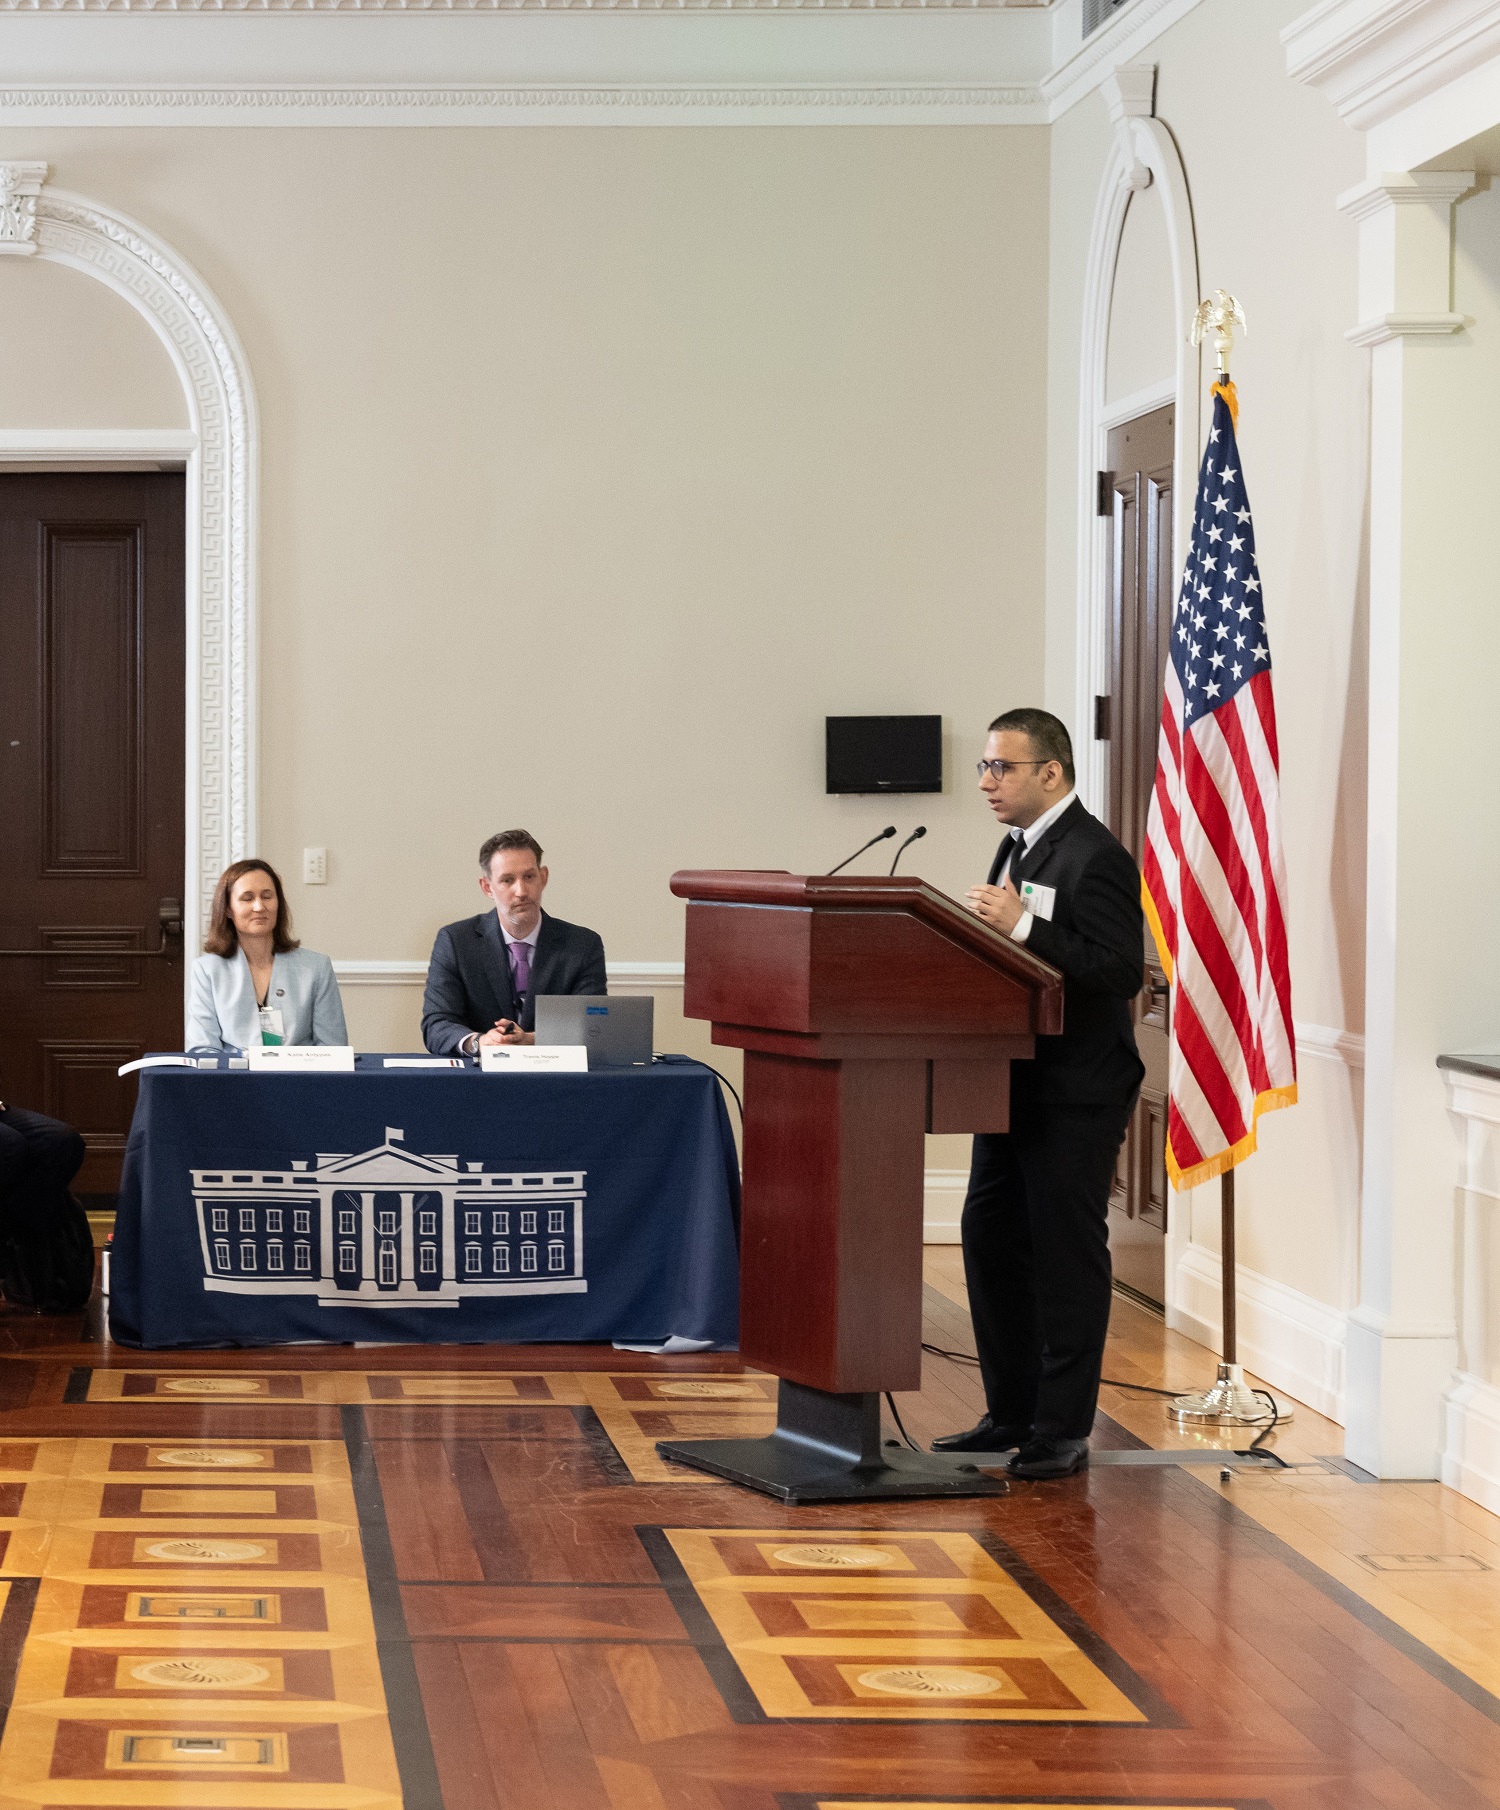 Stony Brook Researcher Harsh Trivedi presents at the White House